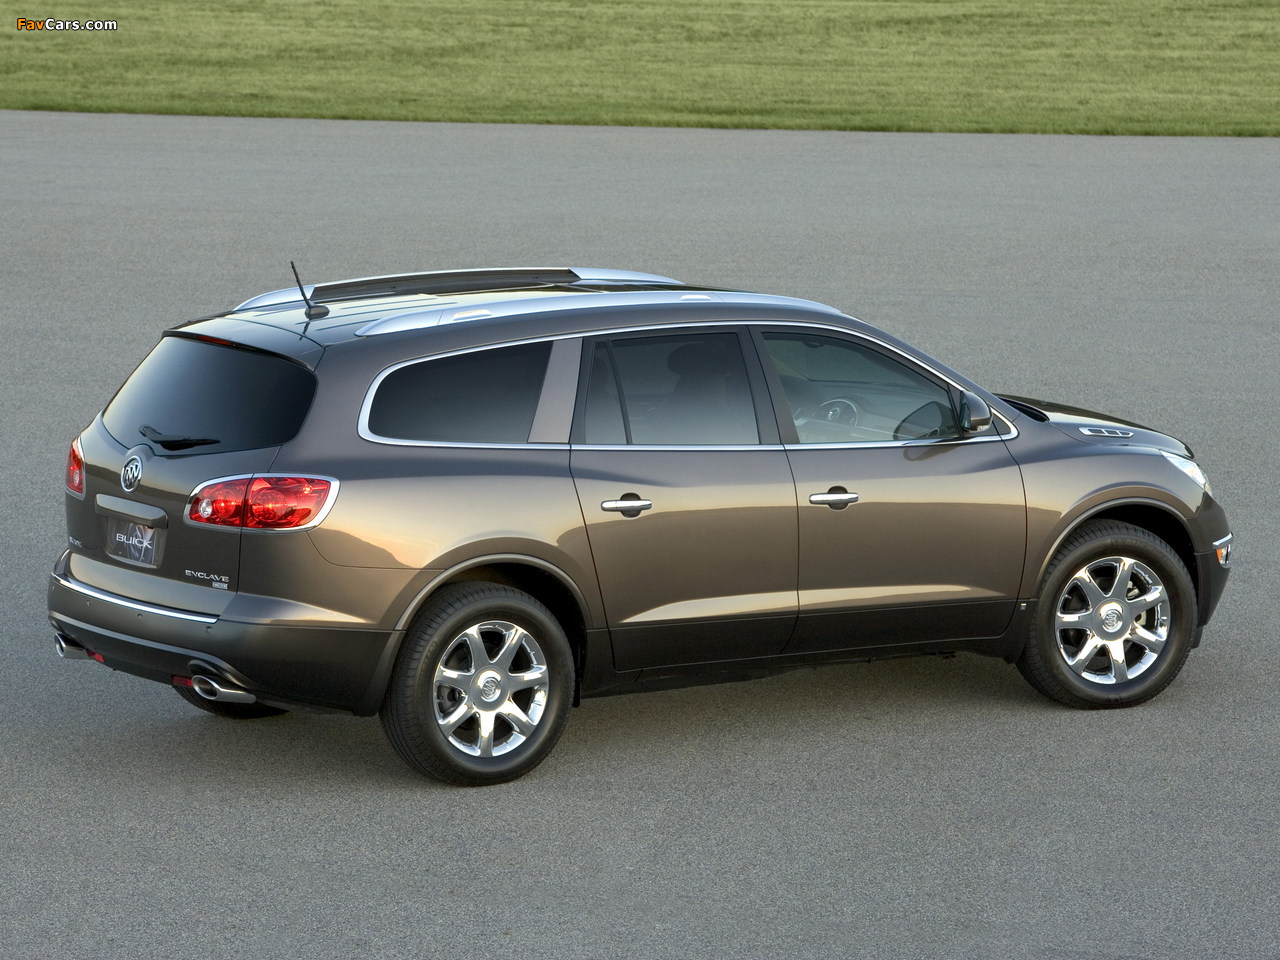 Buick Enclave 2007 pictures (1280 x 960)